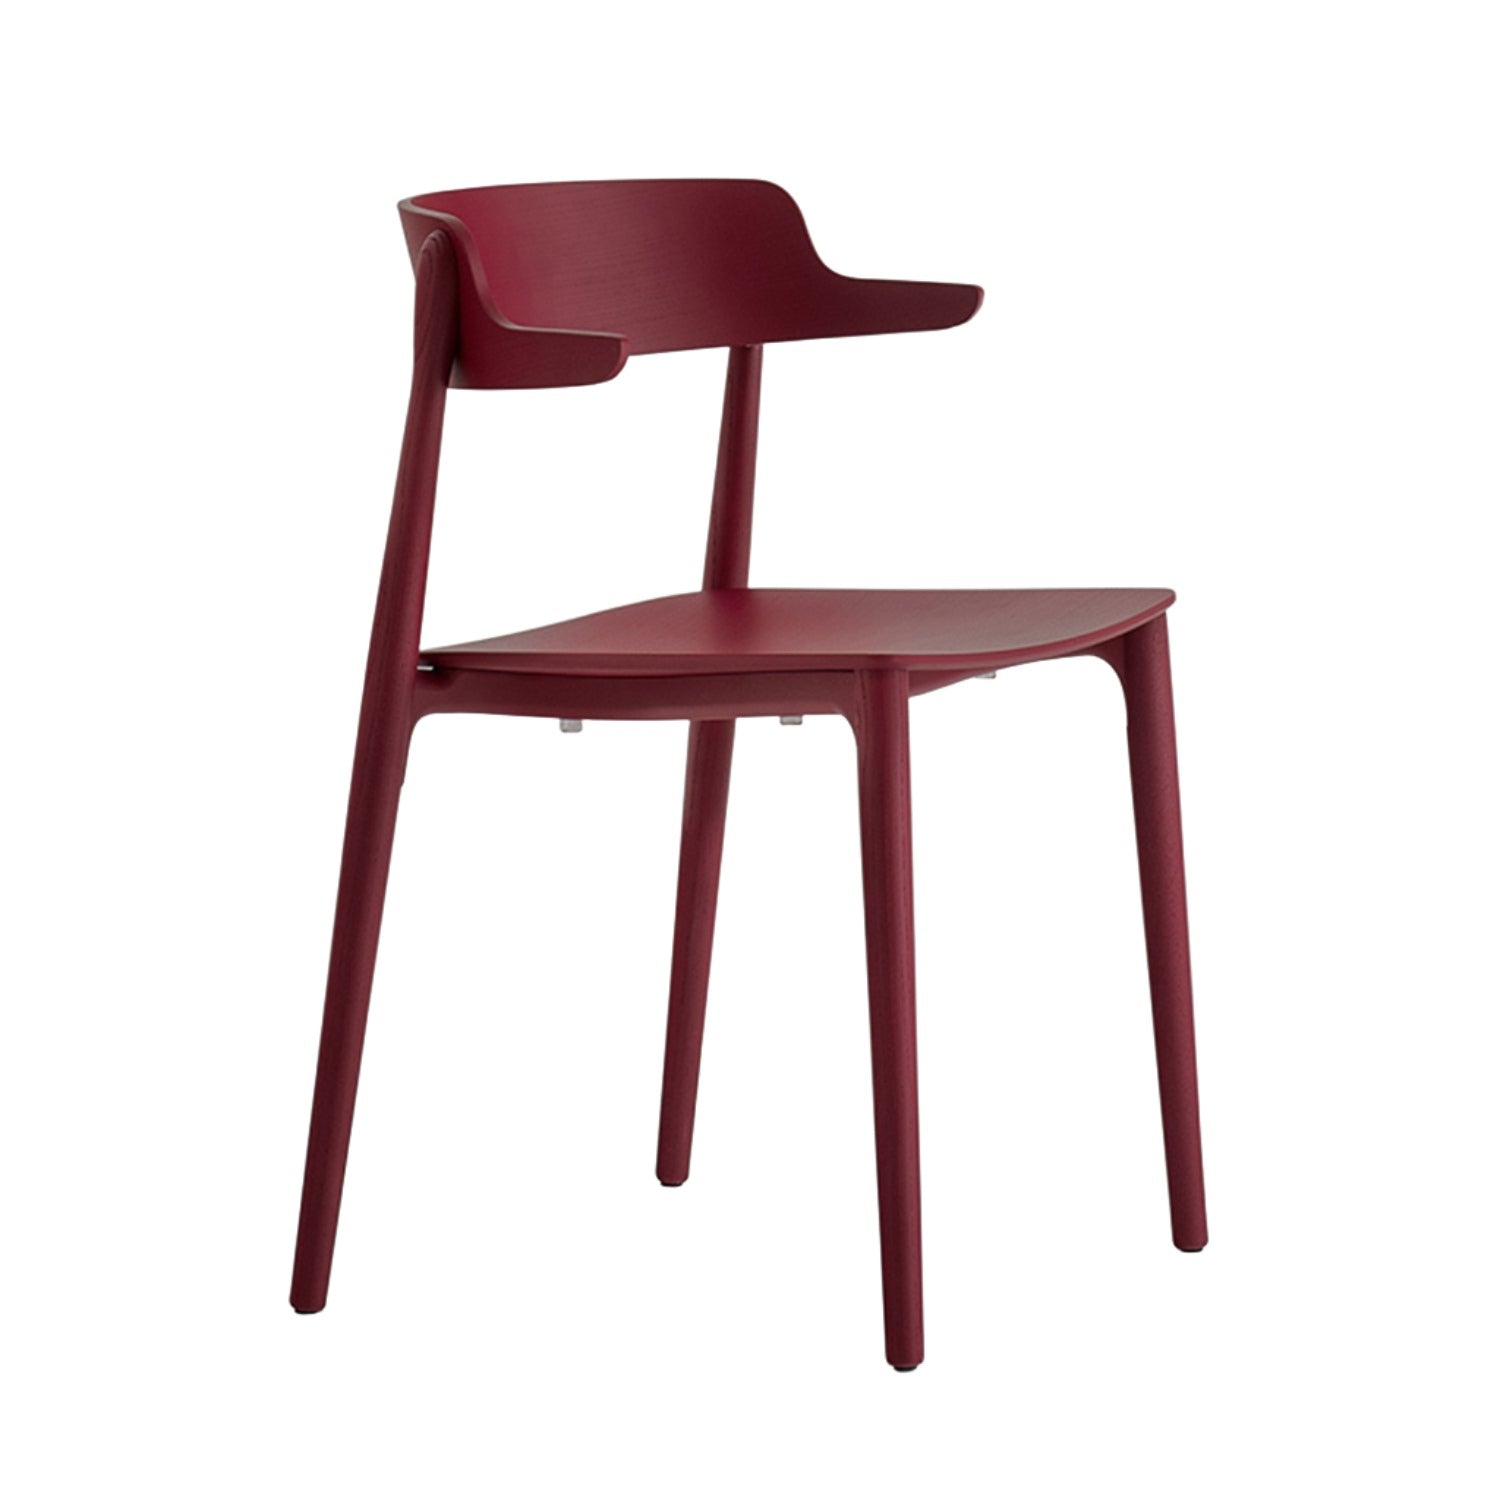 Pedrali Nemea 2825 dining chair in red angle view